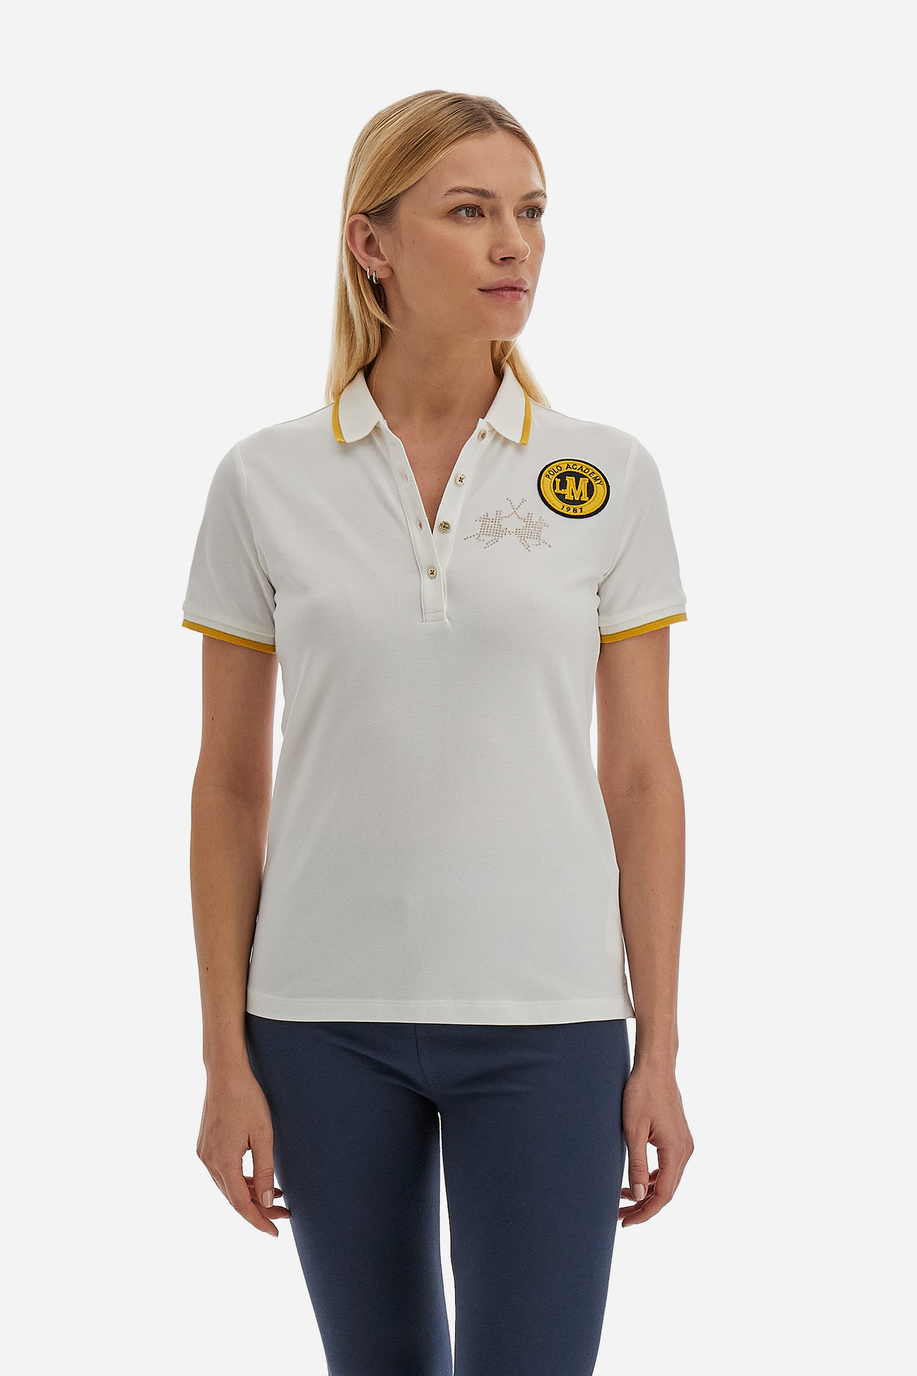 Short-sleeved women's polo shirt with sequined logo and Polo Academy patch - Varka - Our favourites for her | La Martina - Official Online Shop